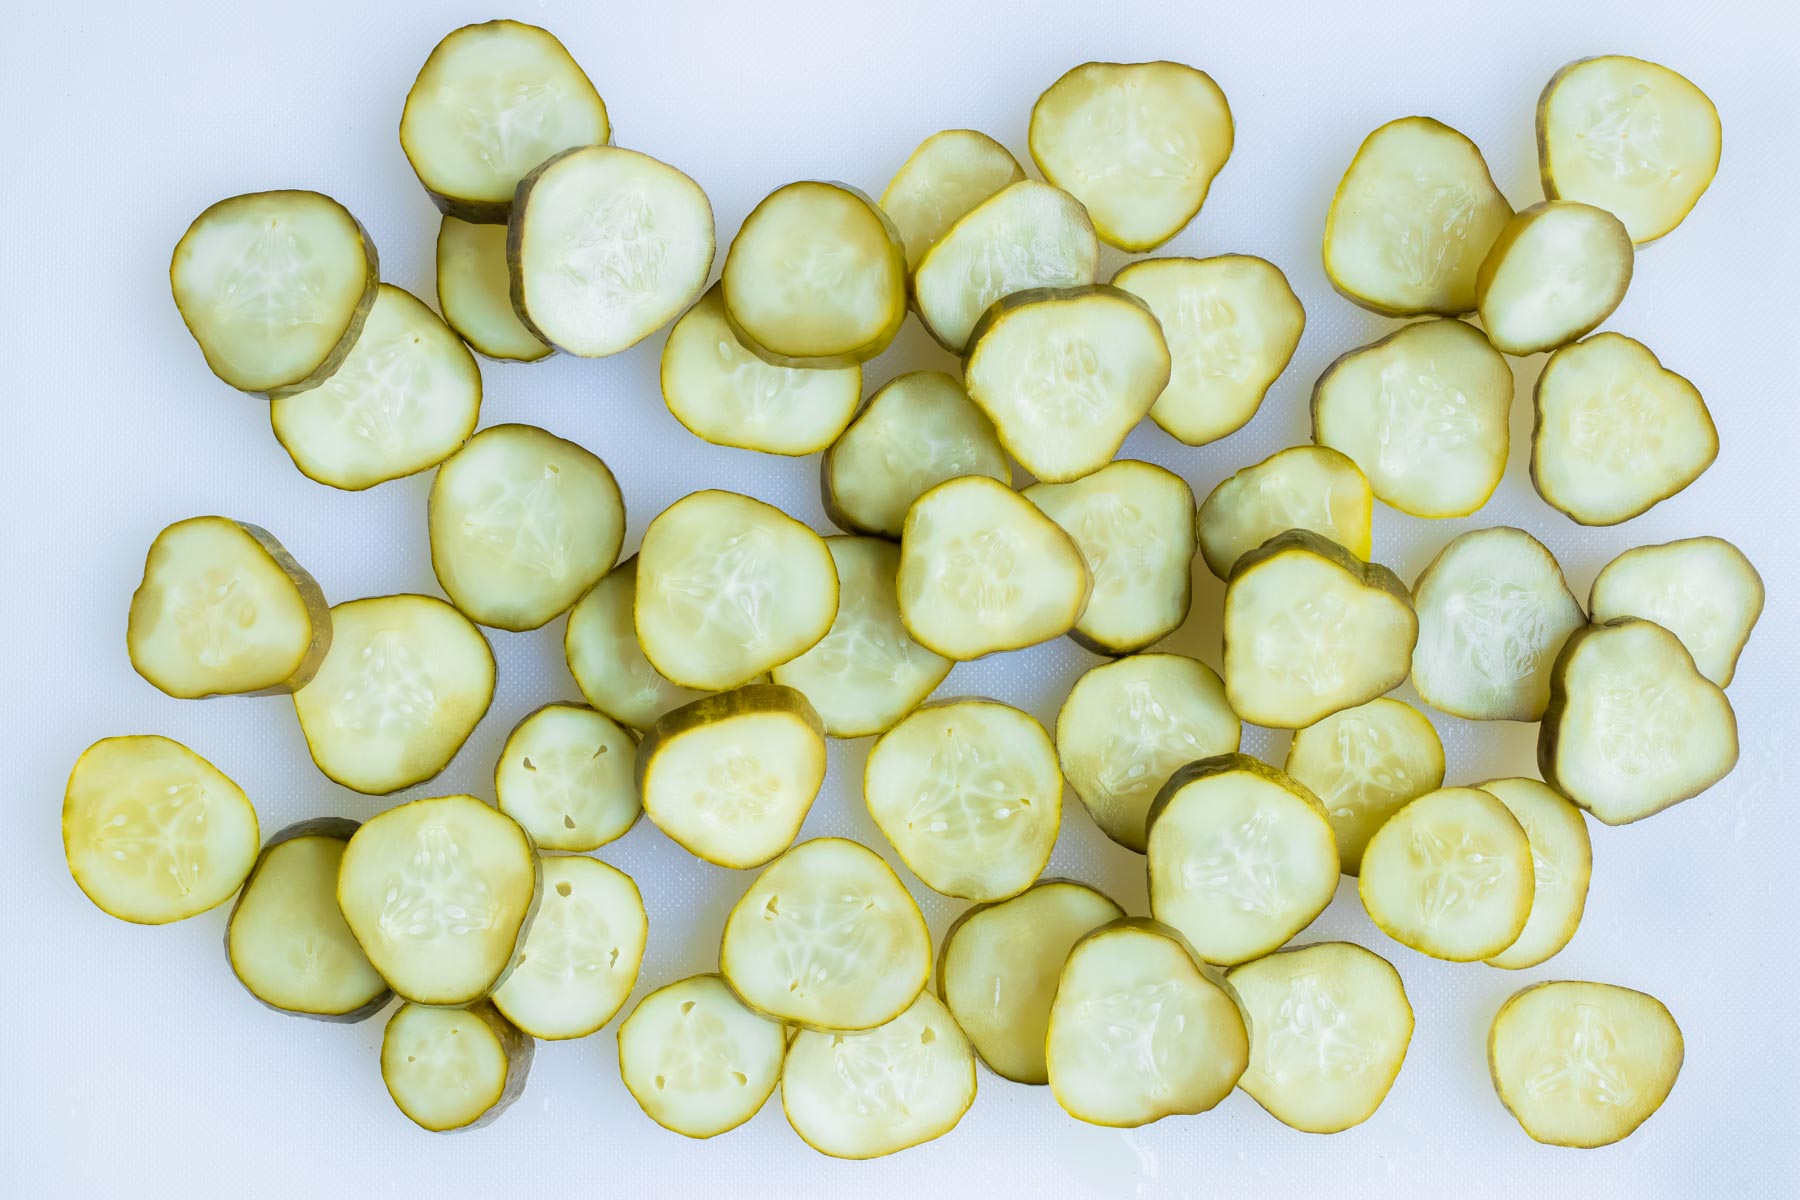 The sliced pickle chips are laid out on the counter.